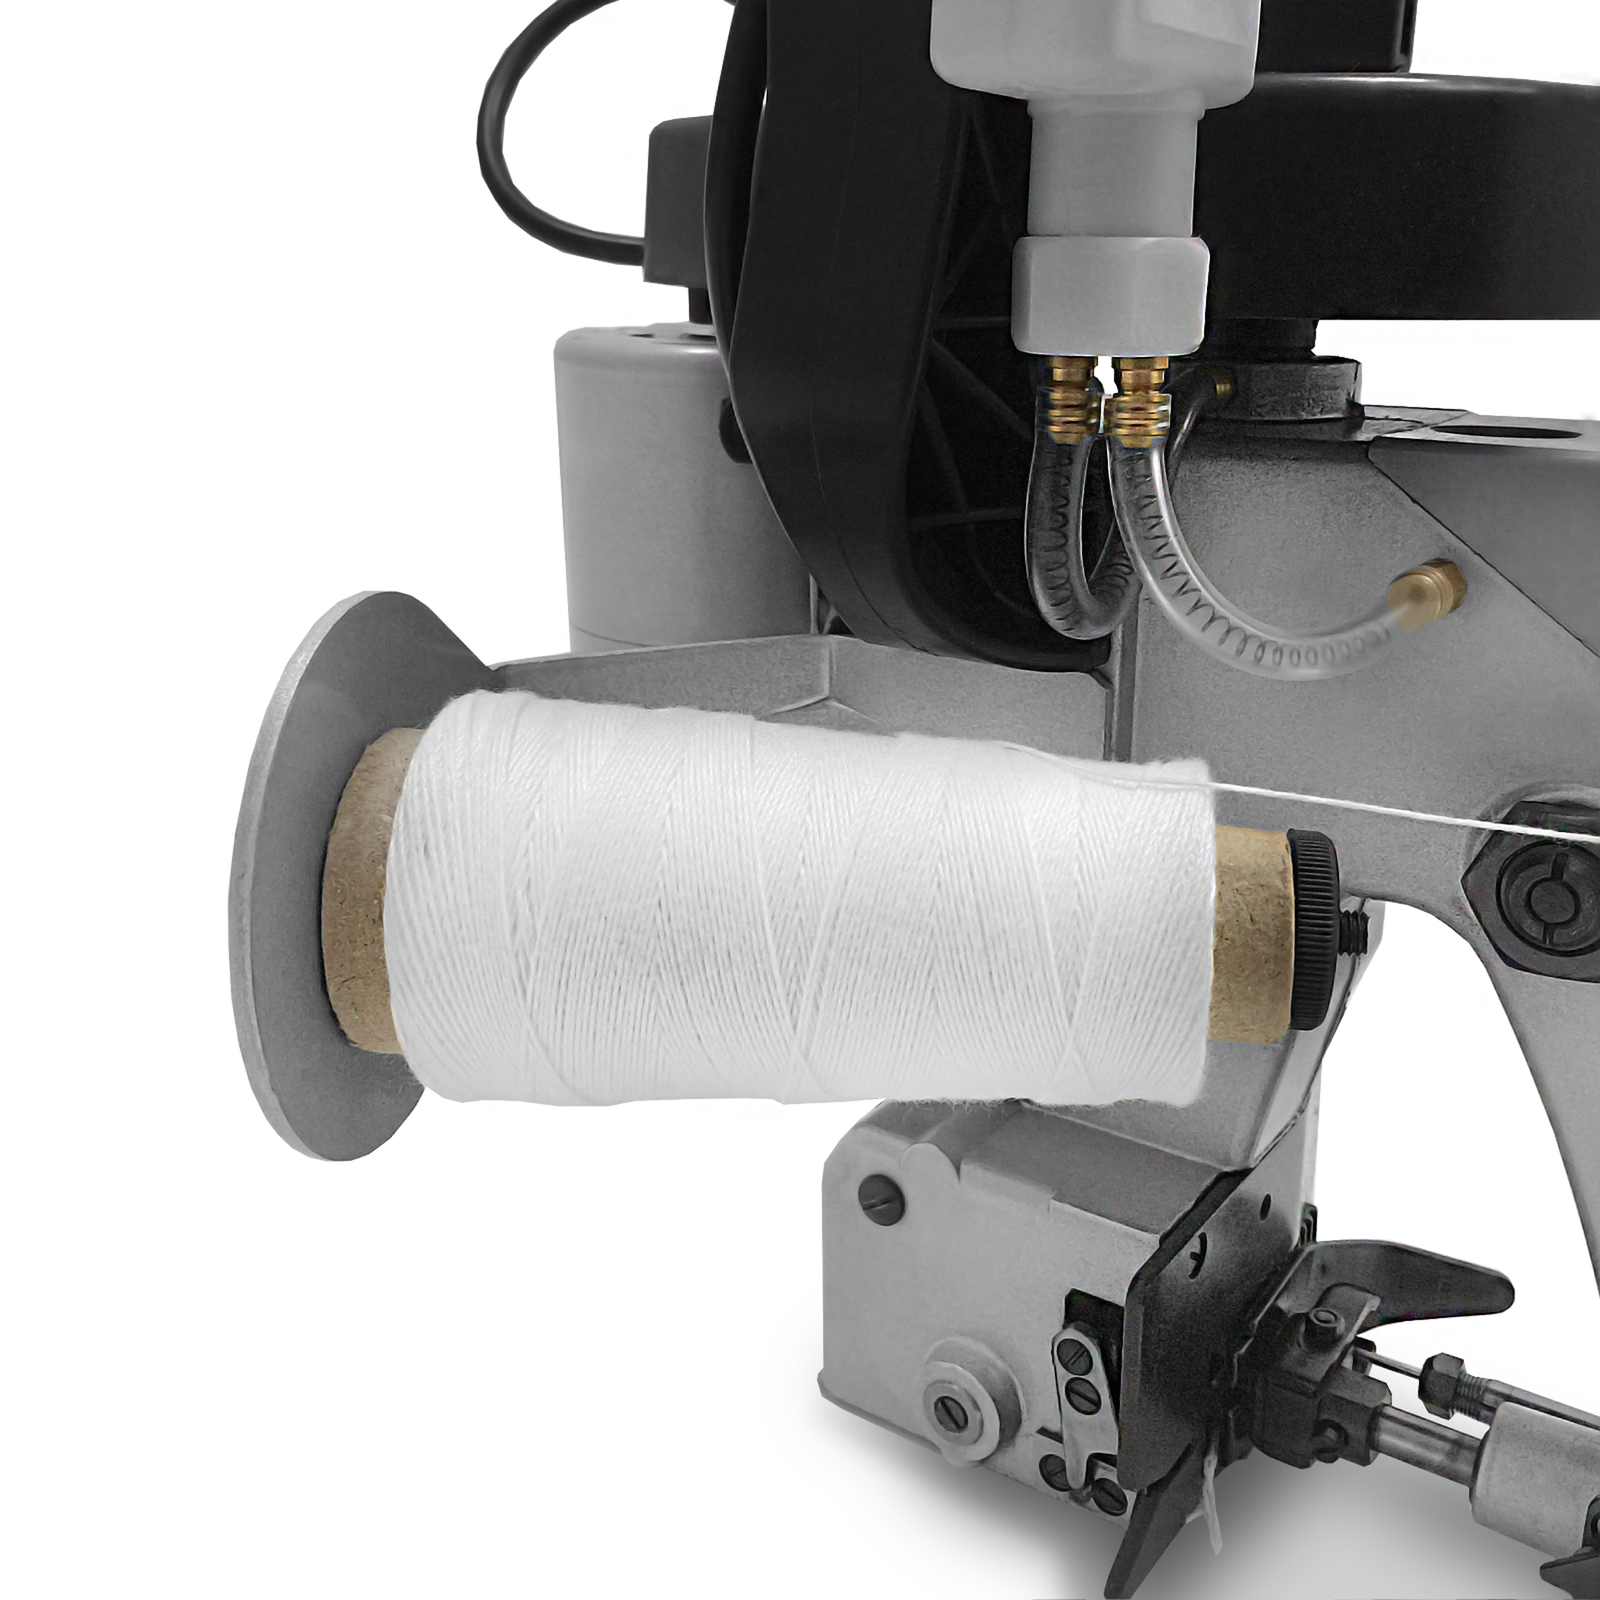 Closeup of the sewing thread installed in the portable JORES TECHNOLOGIES electric bag sewing machine